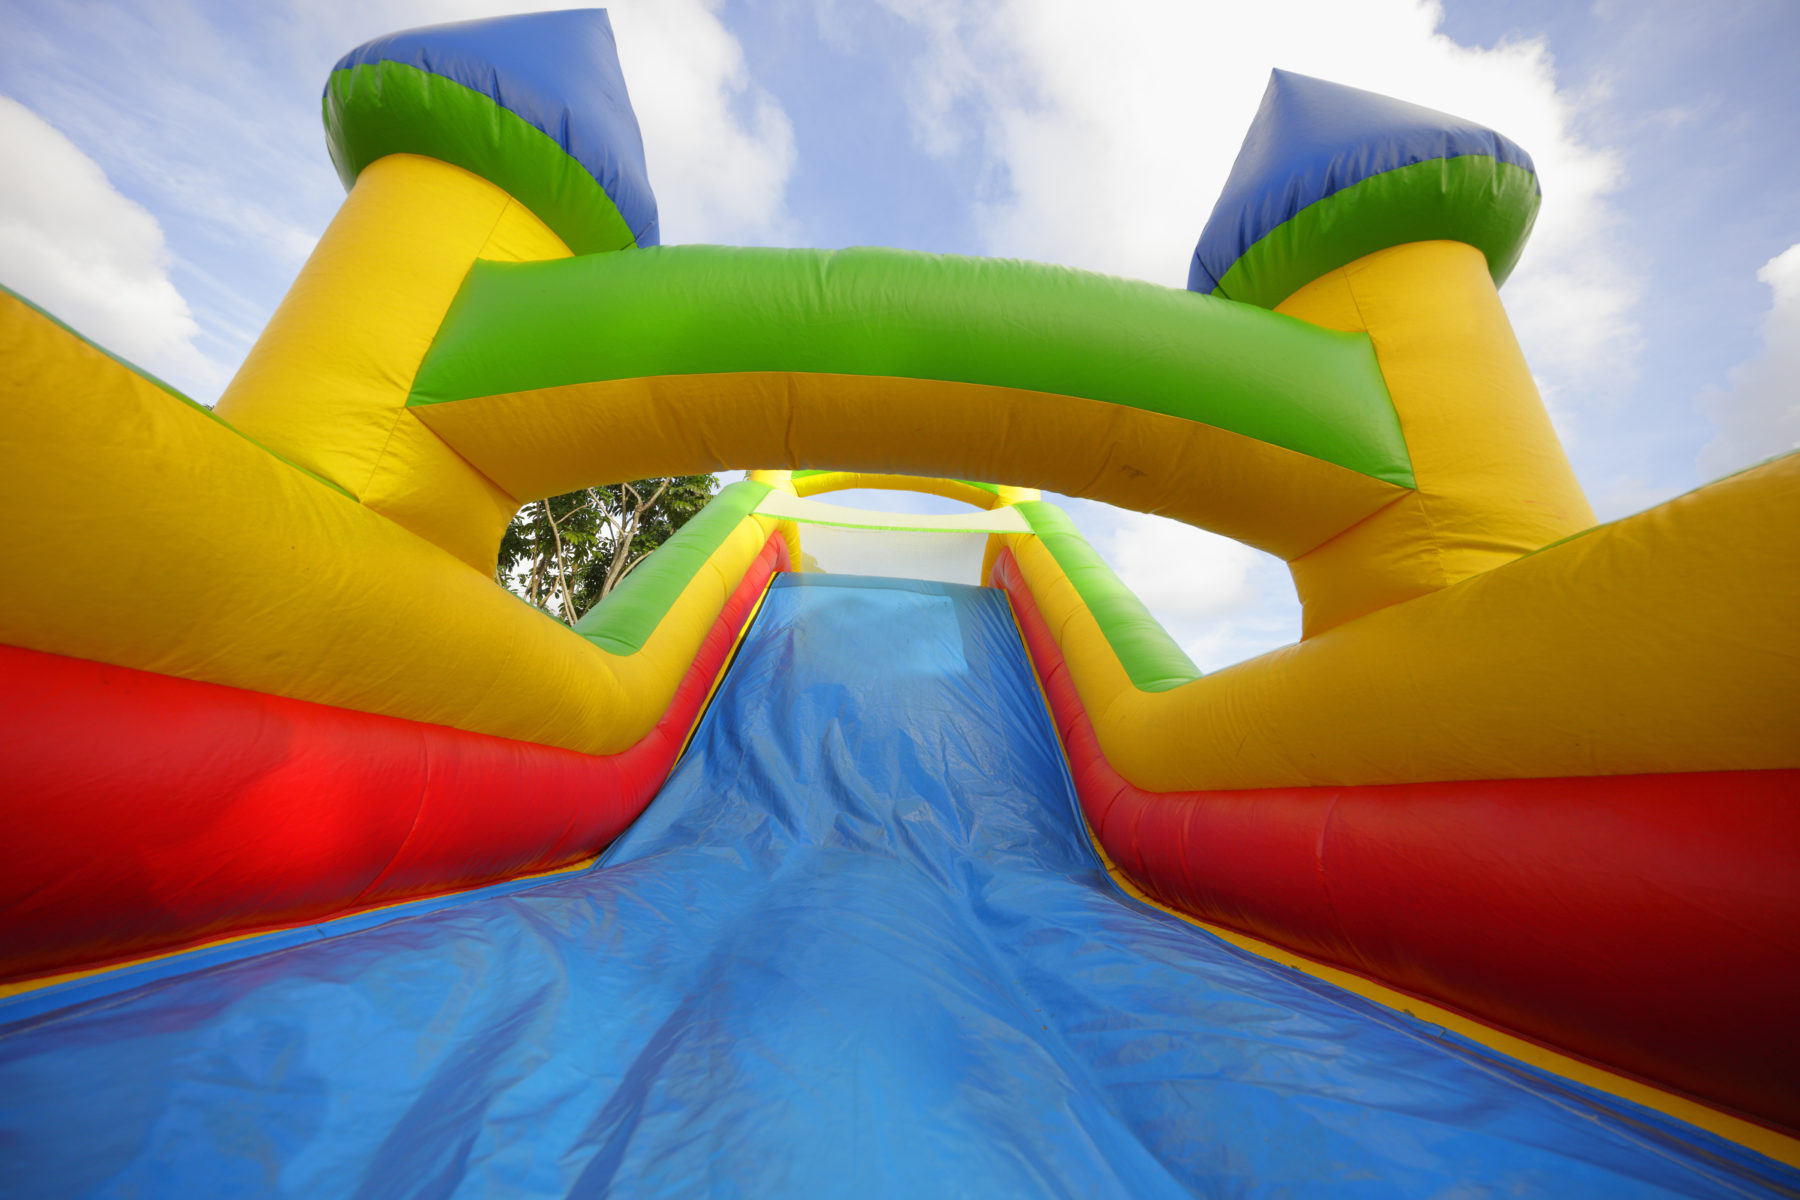 Read more about the article Safety Tips for Inflatable Play Equipment